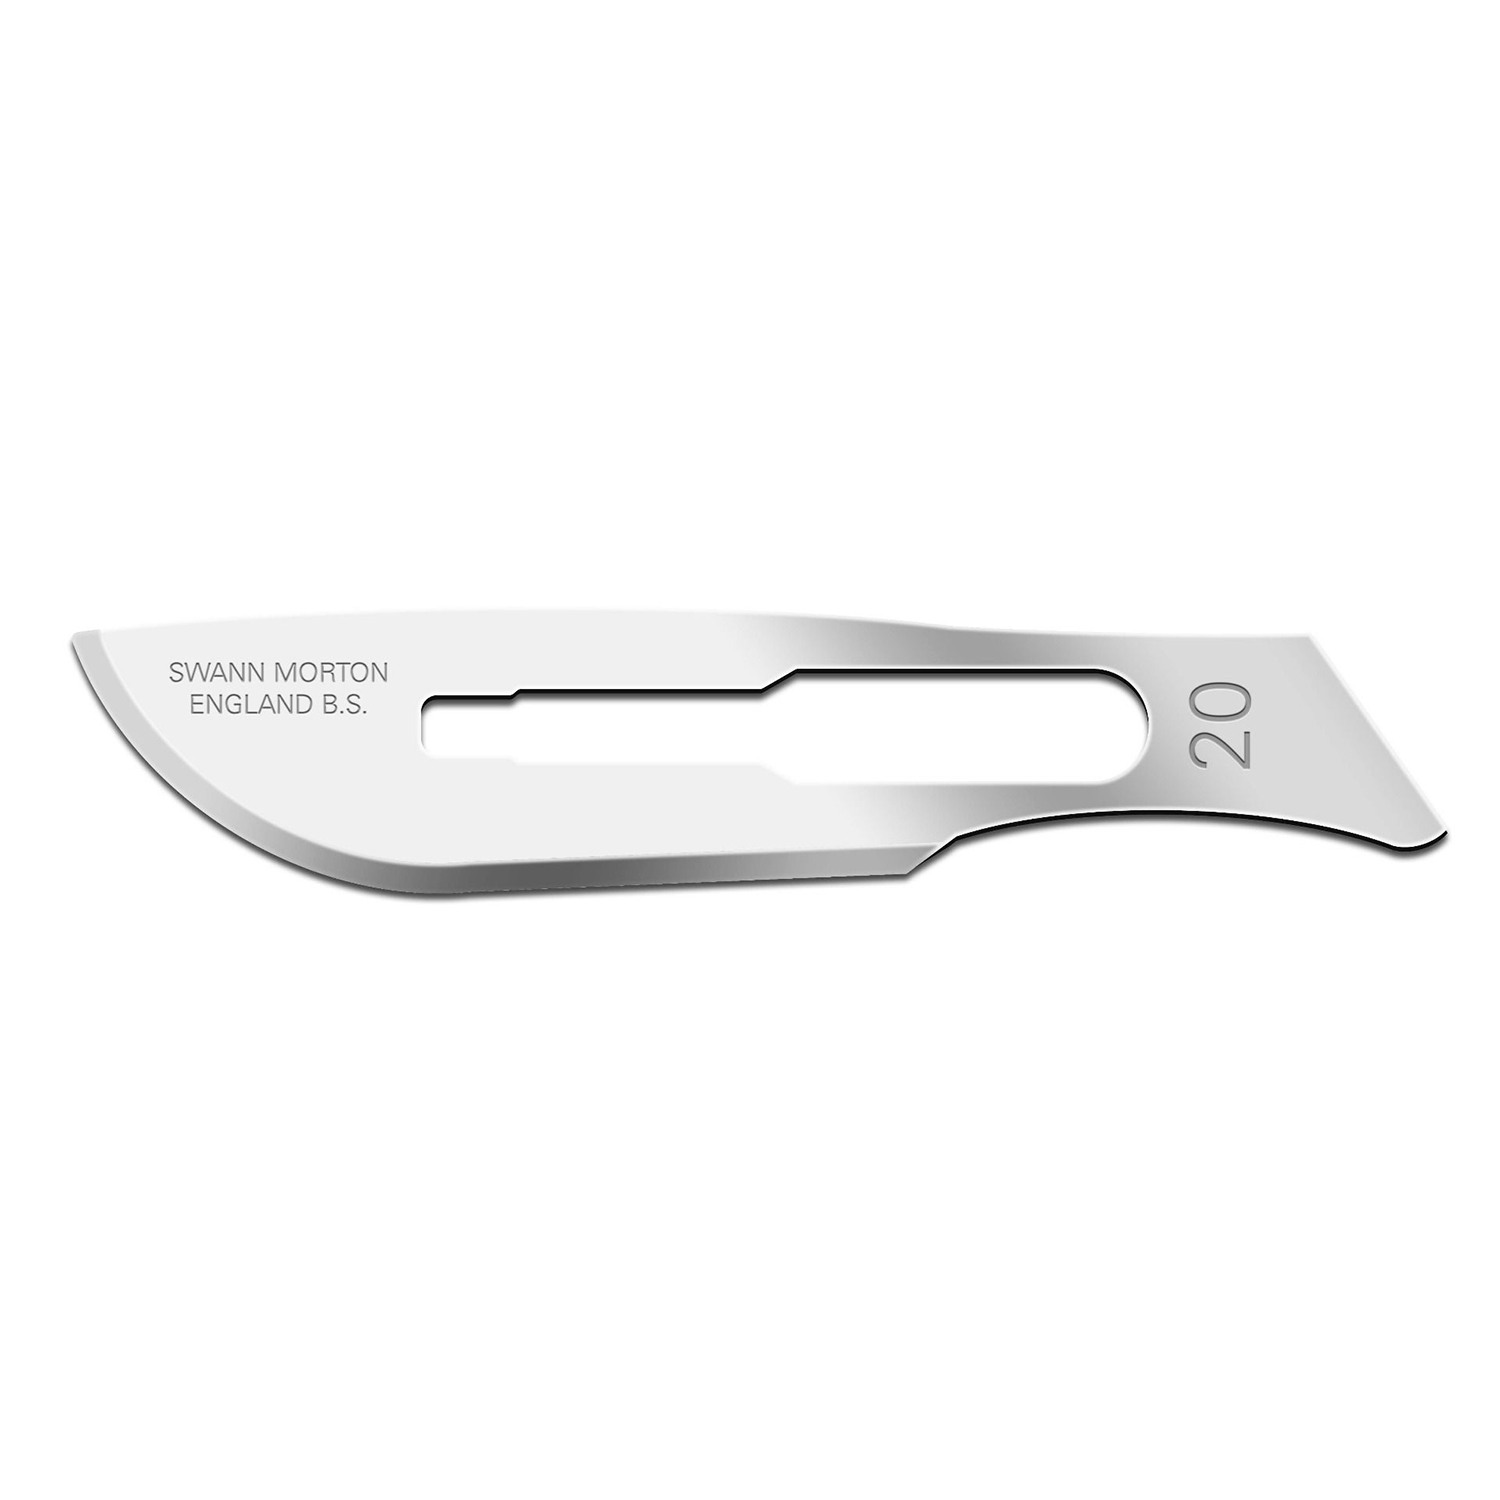 Swann Morton Carbon Steel Surgical Blades | No.20 | Sterile | Pack of 100